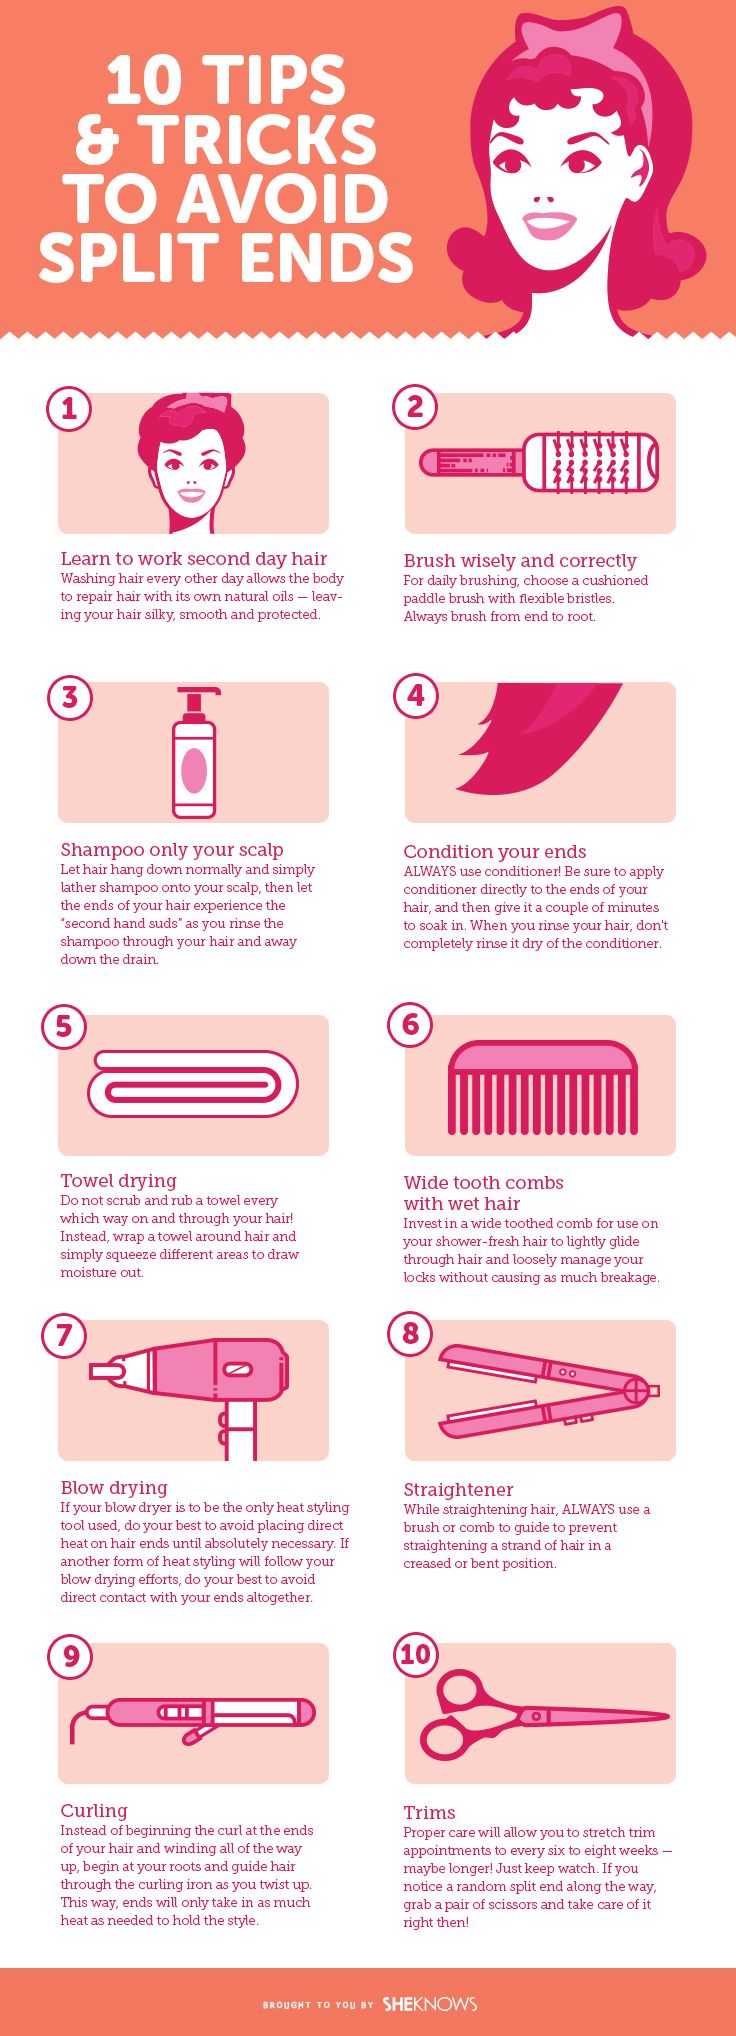 Tricks And Tips To Avoid Split Ends